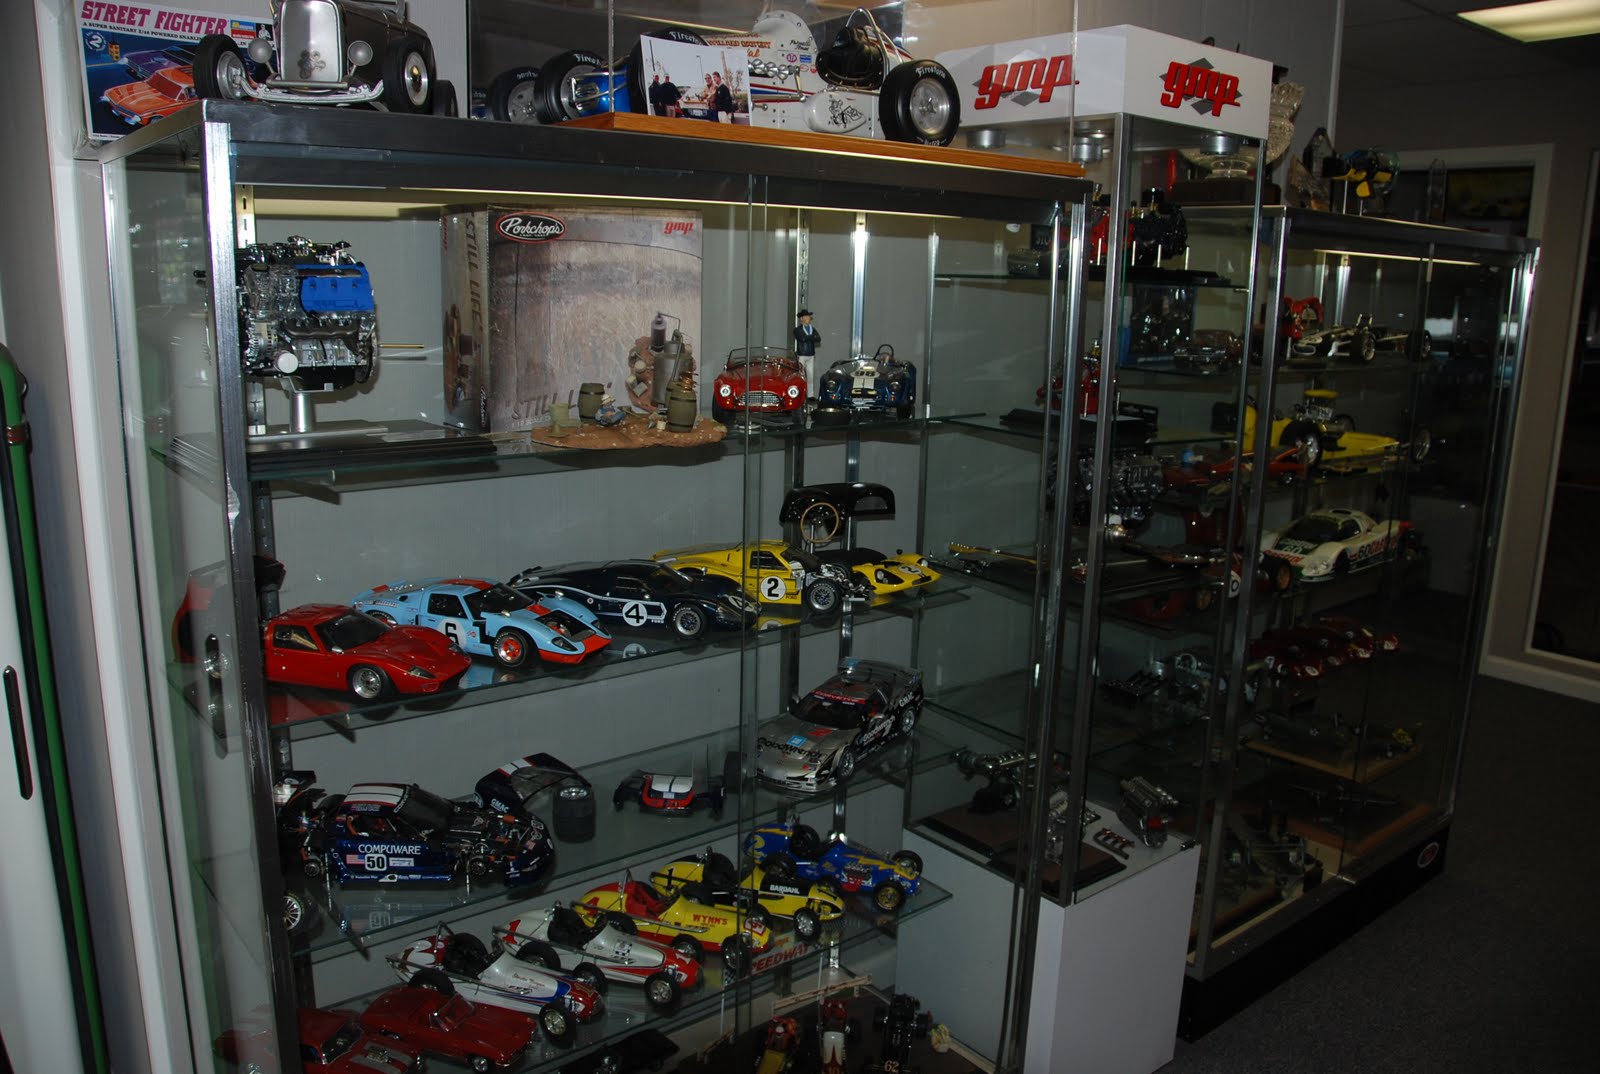 The Legendary Garage: Do you collect die-cast vehicles?